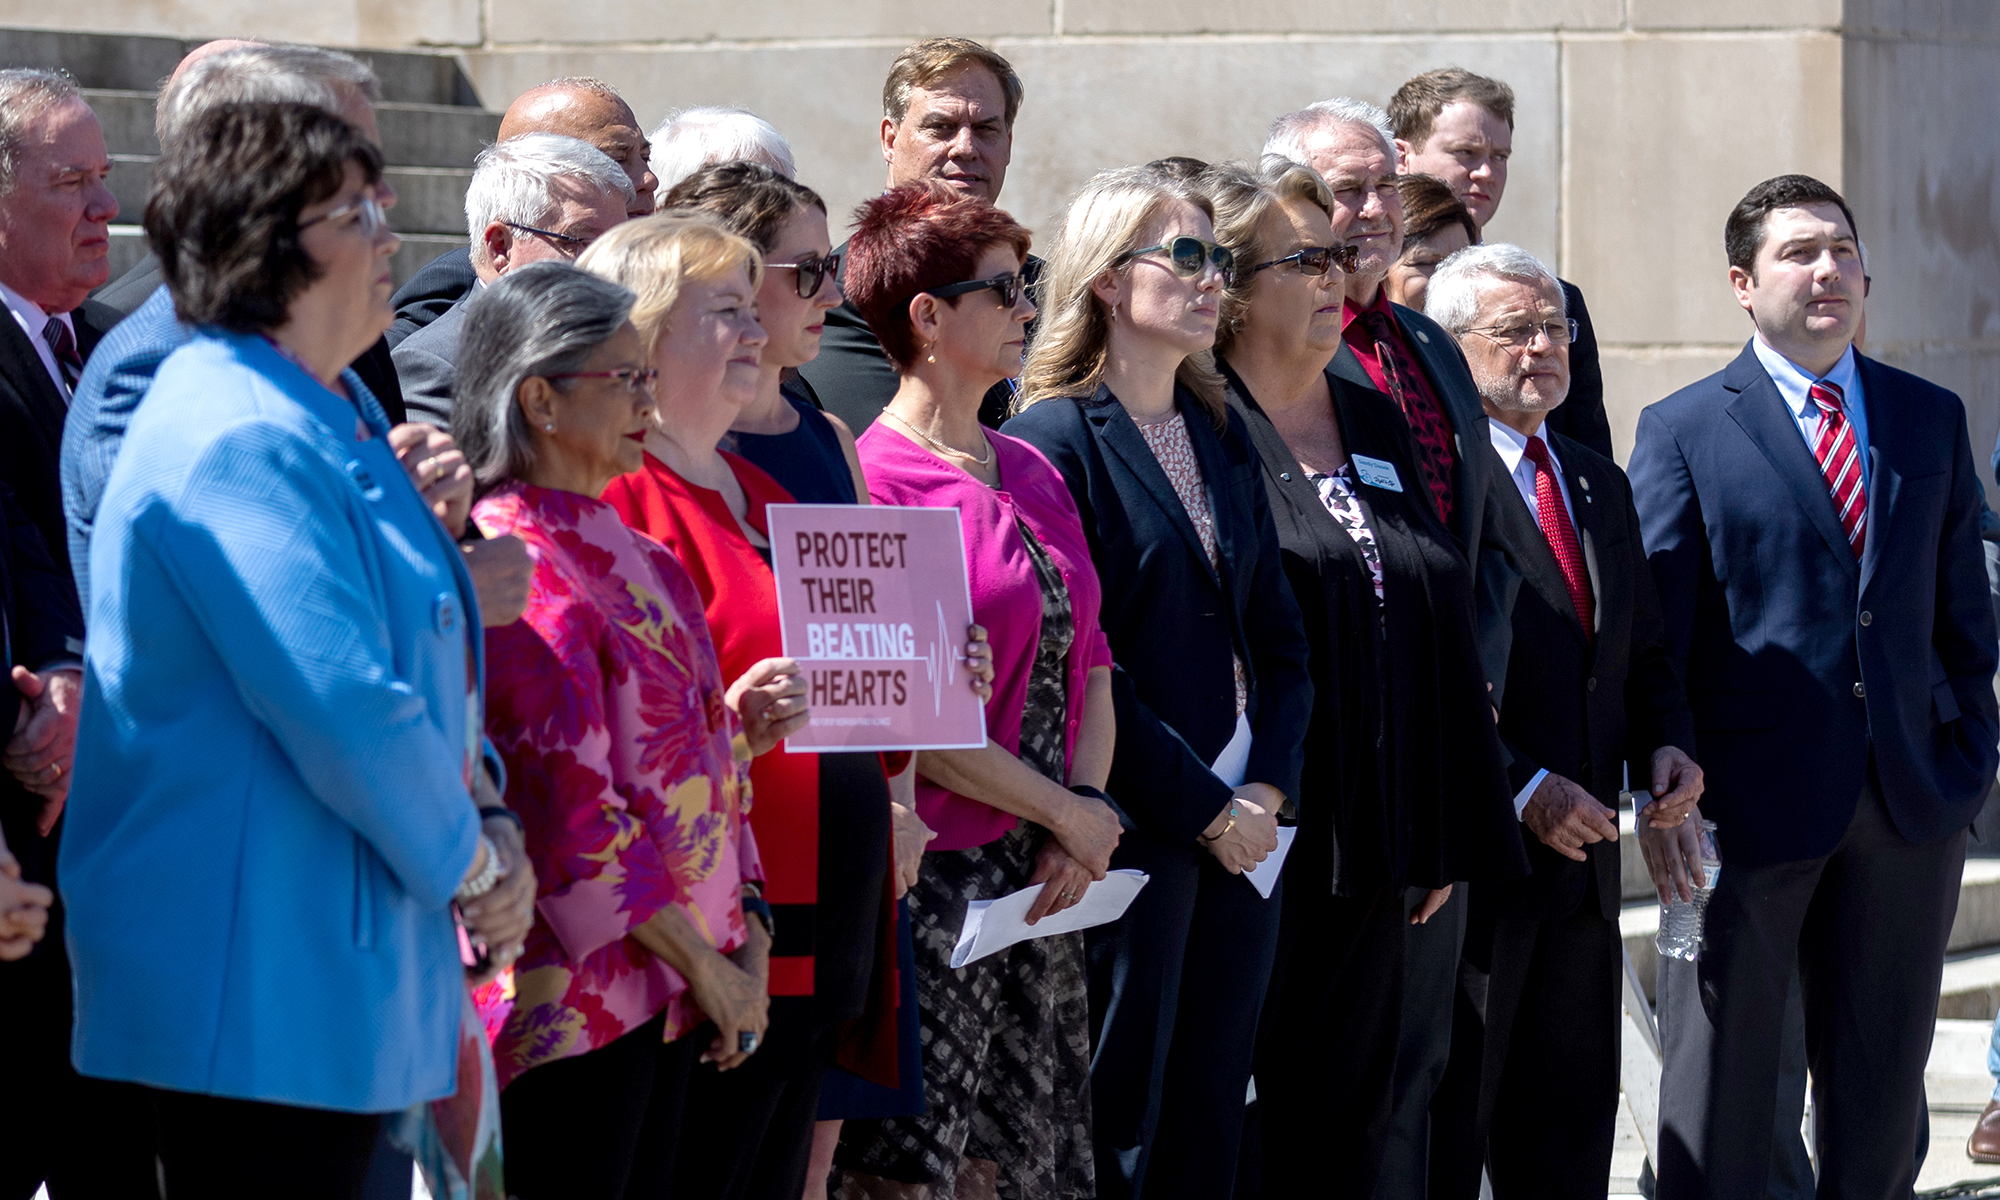 Nebraska legislators pose with anti-abortion advocates at a rally on the north steps of the state Capitol in support of a bill to ban abortion at about six weeks. That measure failed to advance, but lawmakers did pass a 12-week ban. (Photo by Joseph Kual Zakaria/News21)